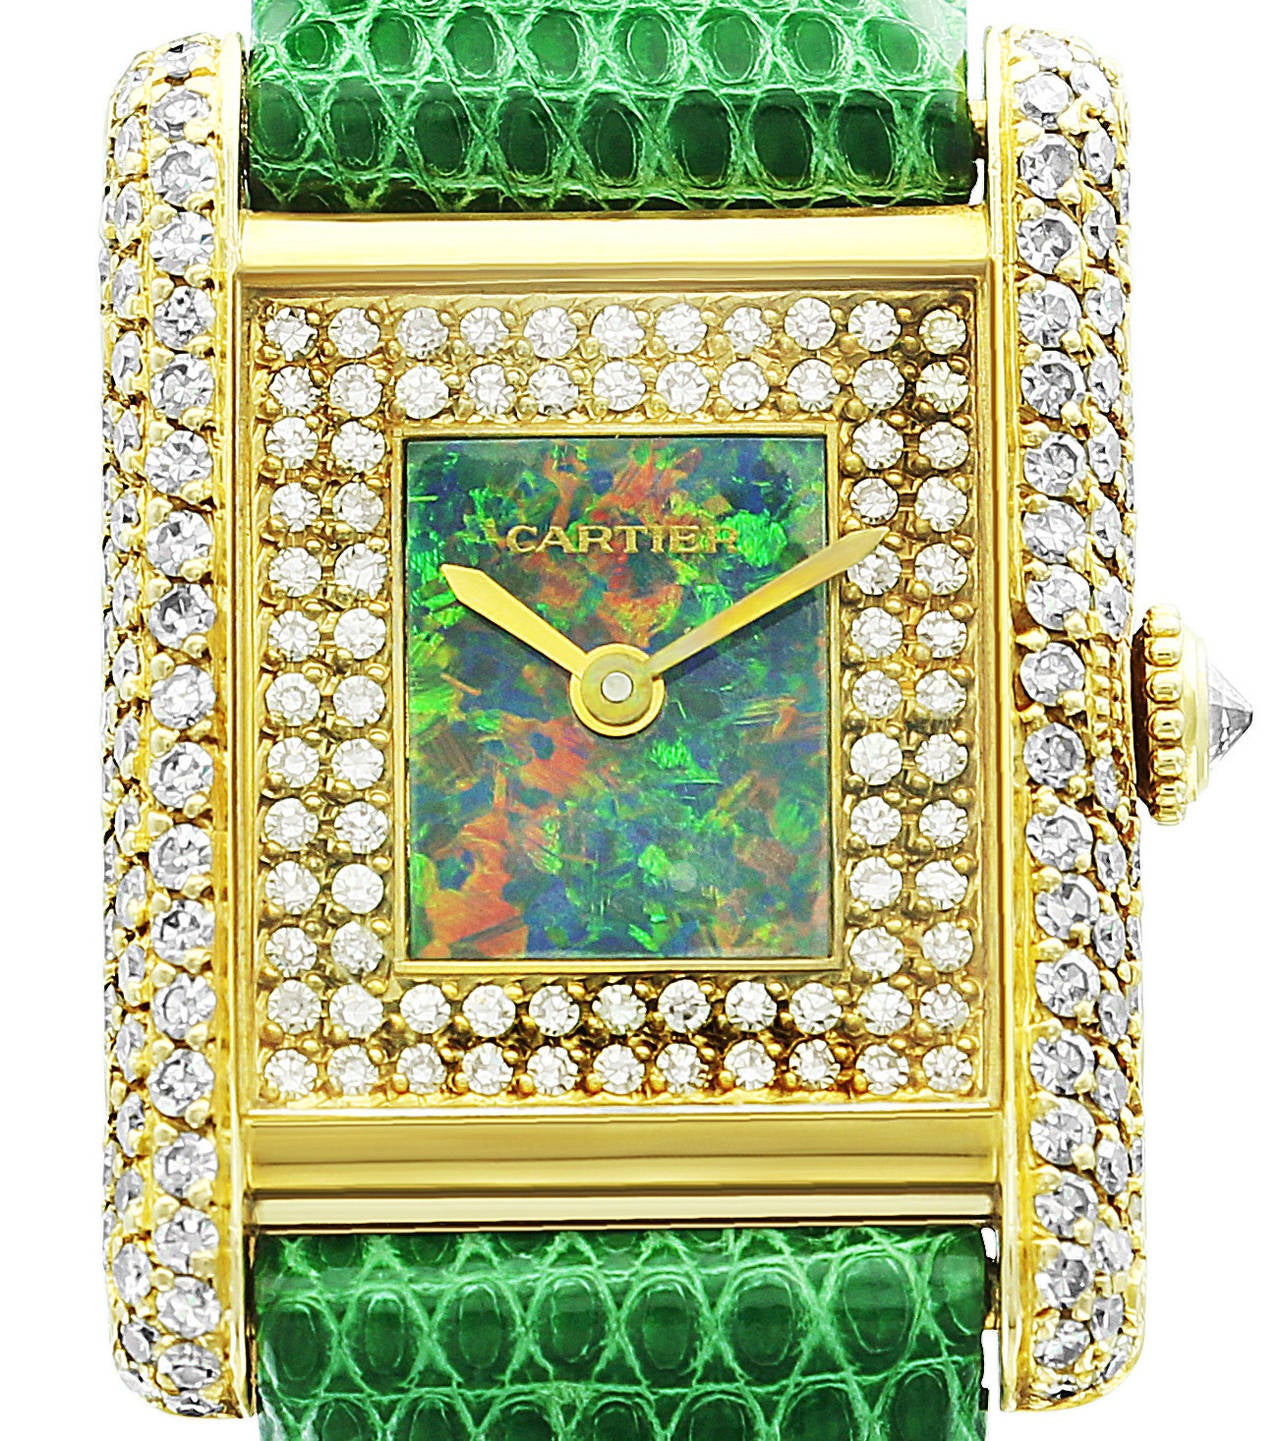 An extremely unusual jeweled classic Tank watch with pave diamond dial and Opal inner dial. This is a very beautiful and feminine piece in unbelievable condition from the 1970's.